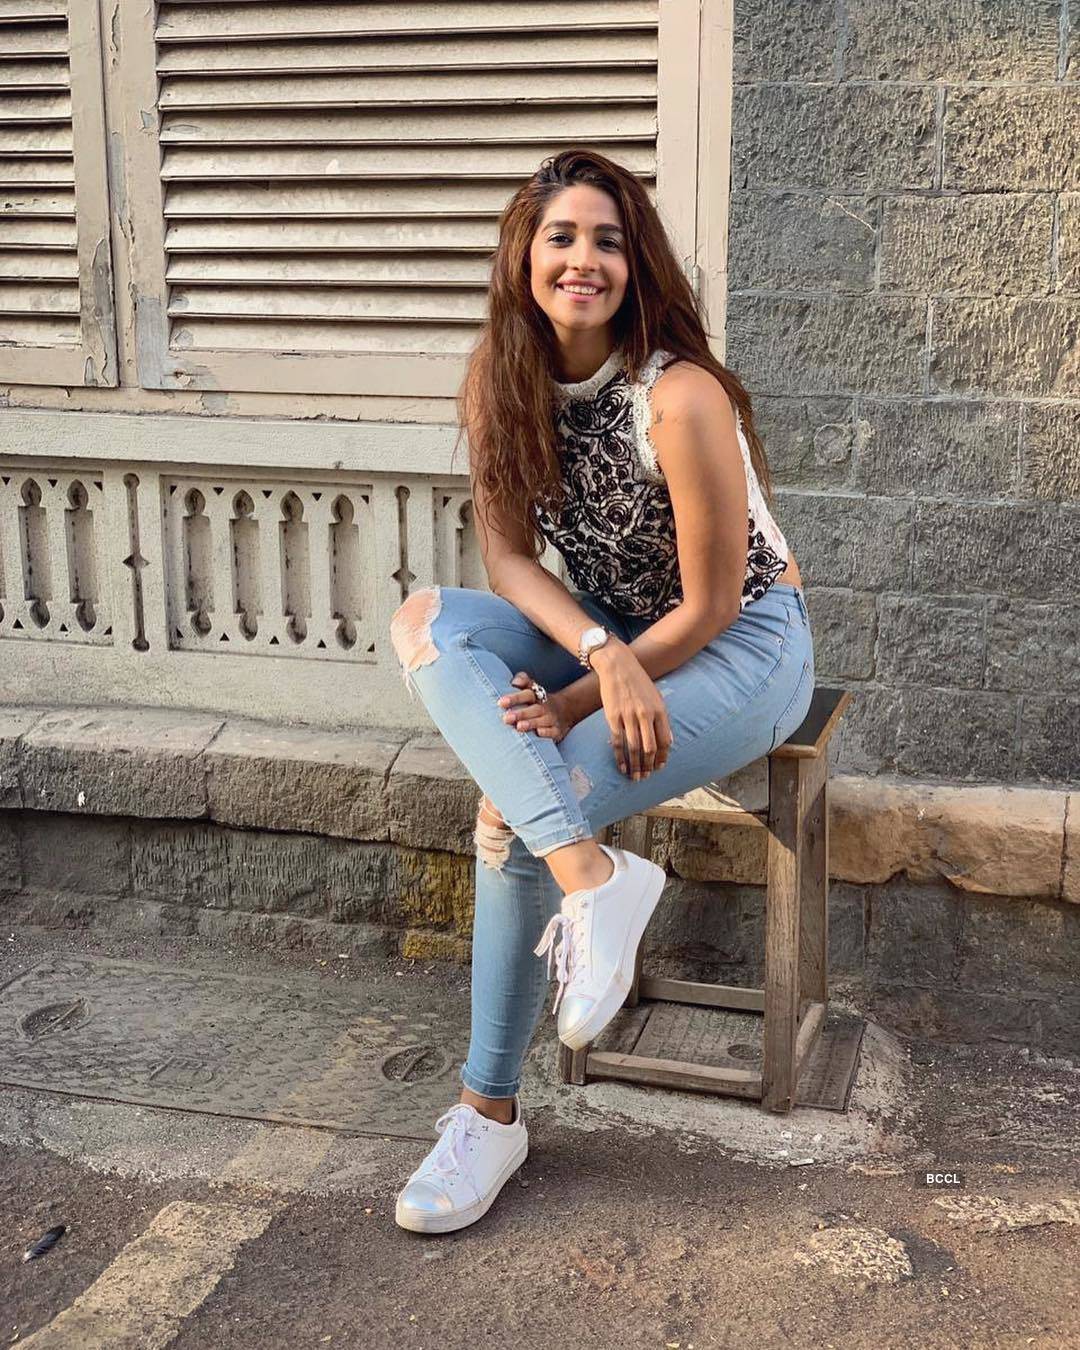 Stunning pictures of Harleen Sethi, who is reportedly dating actor Vicky Kaushal